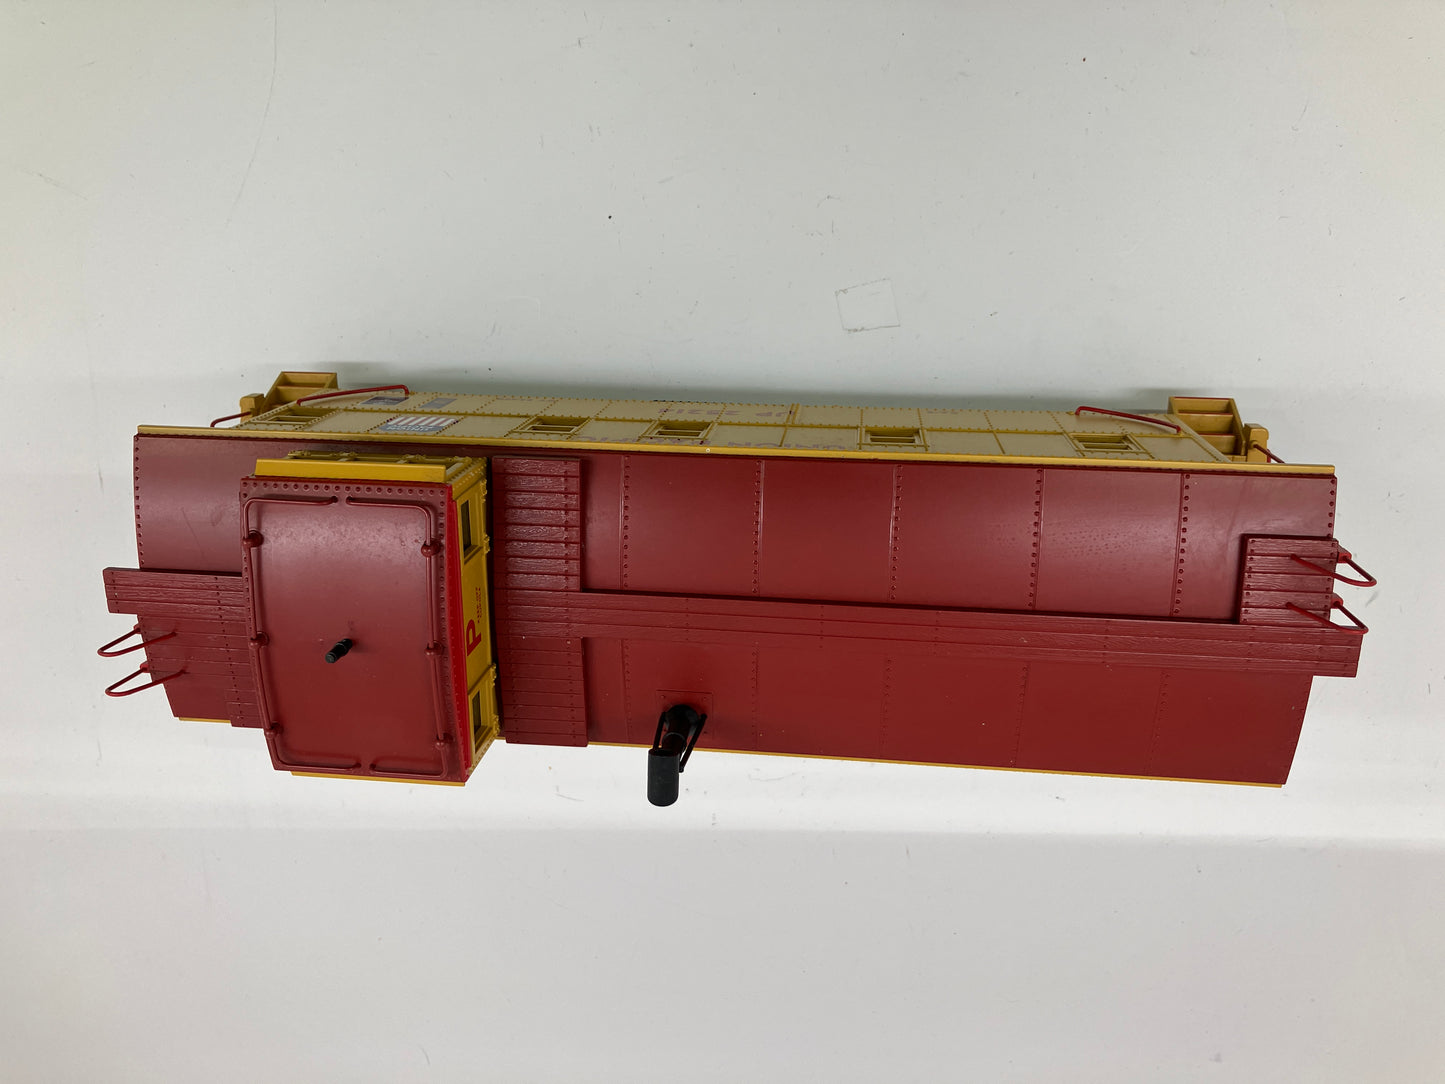 MTH UP 3 RAIL O SCALE EXTENDED VISION CABOOSE - UNION PACIFIC 25214